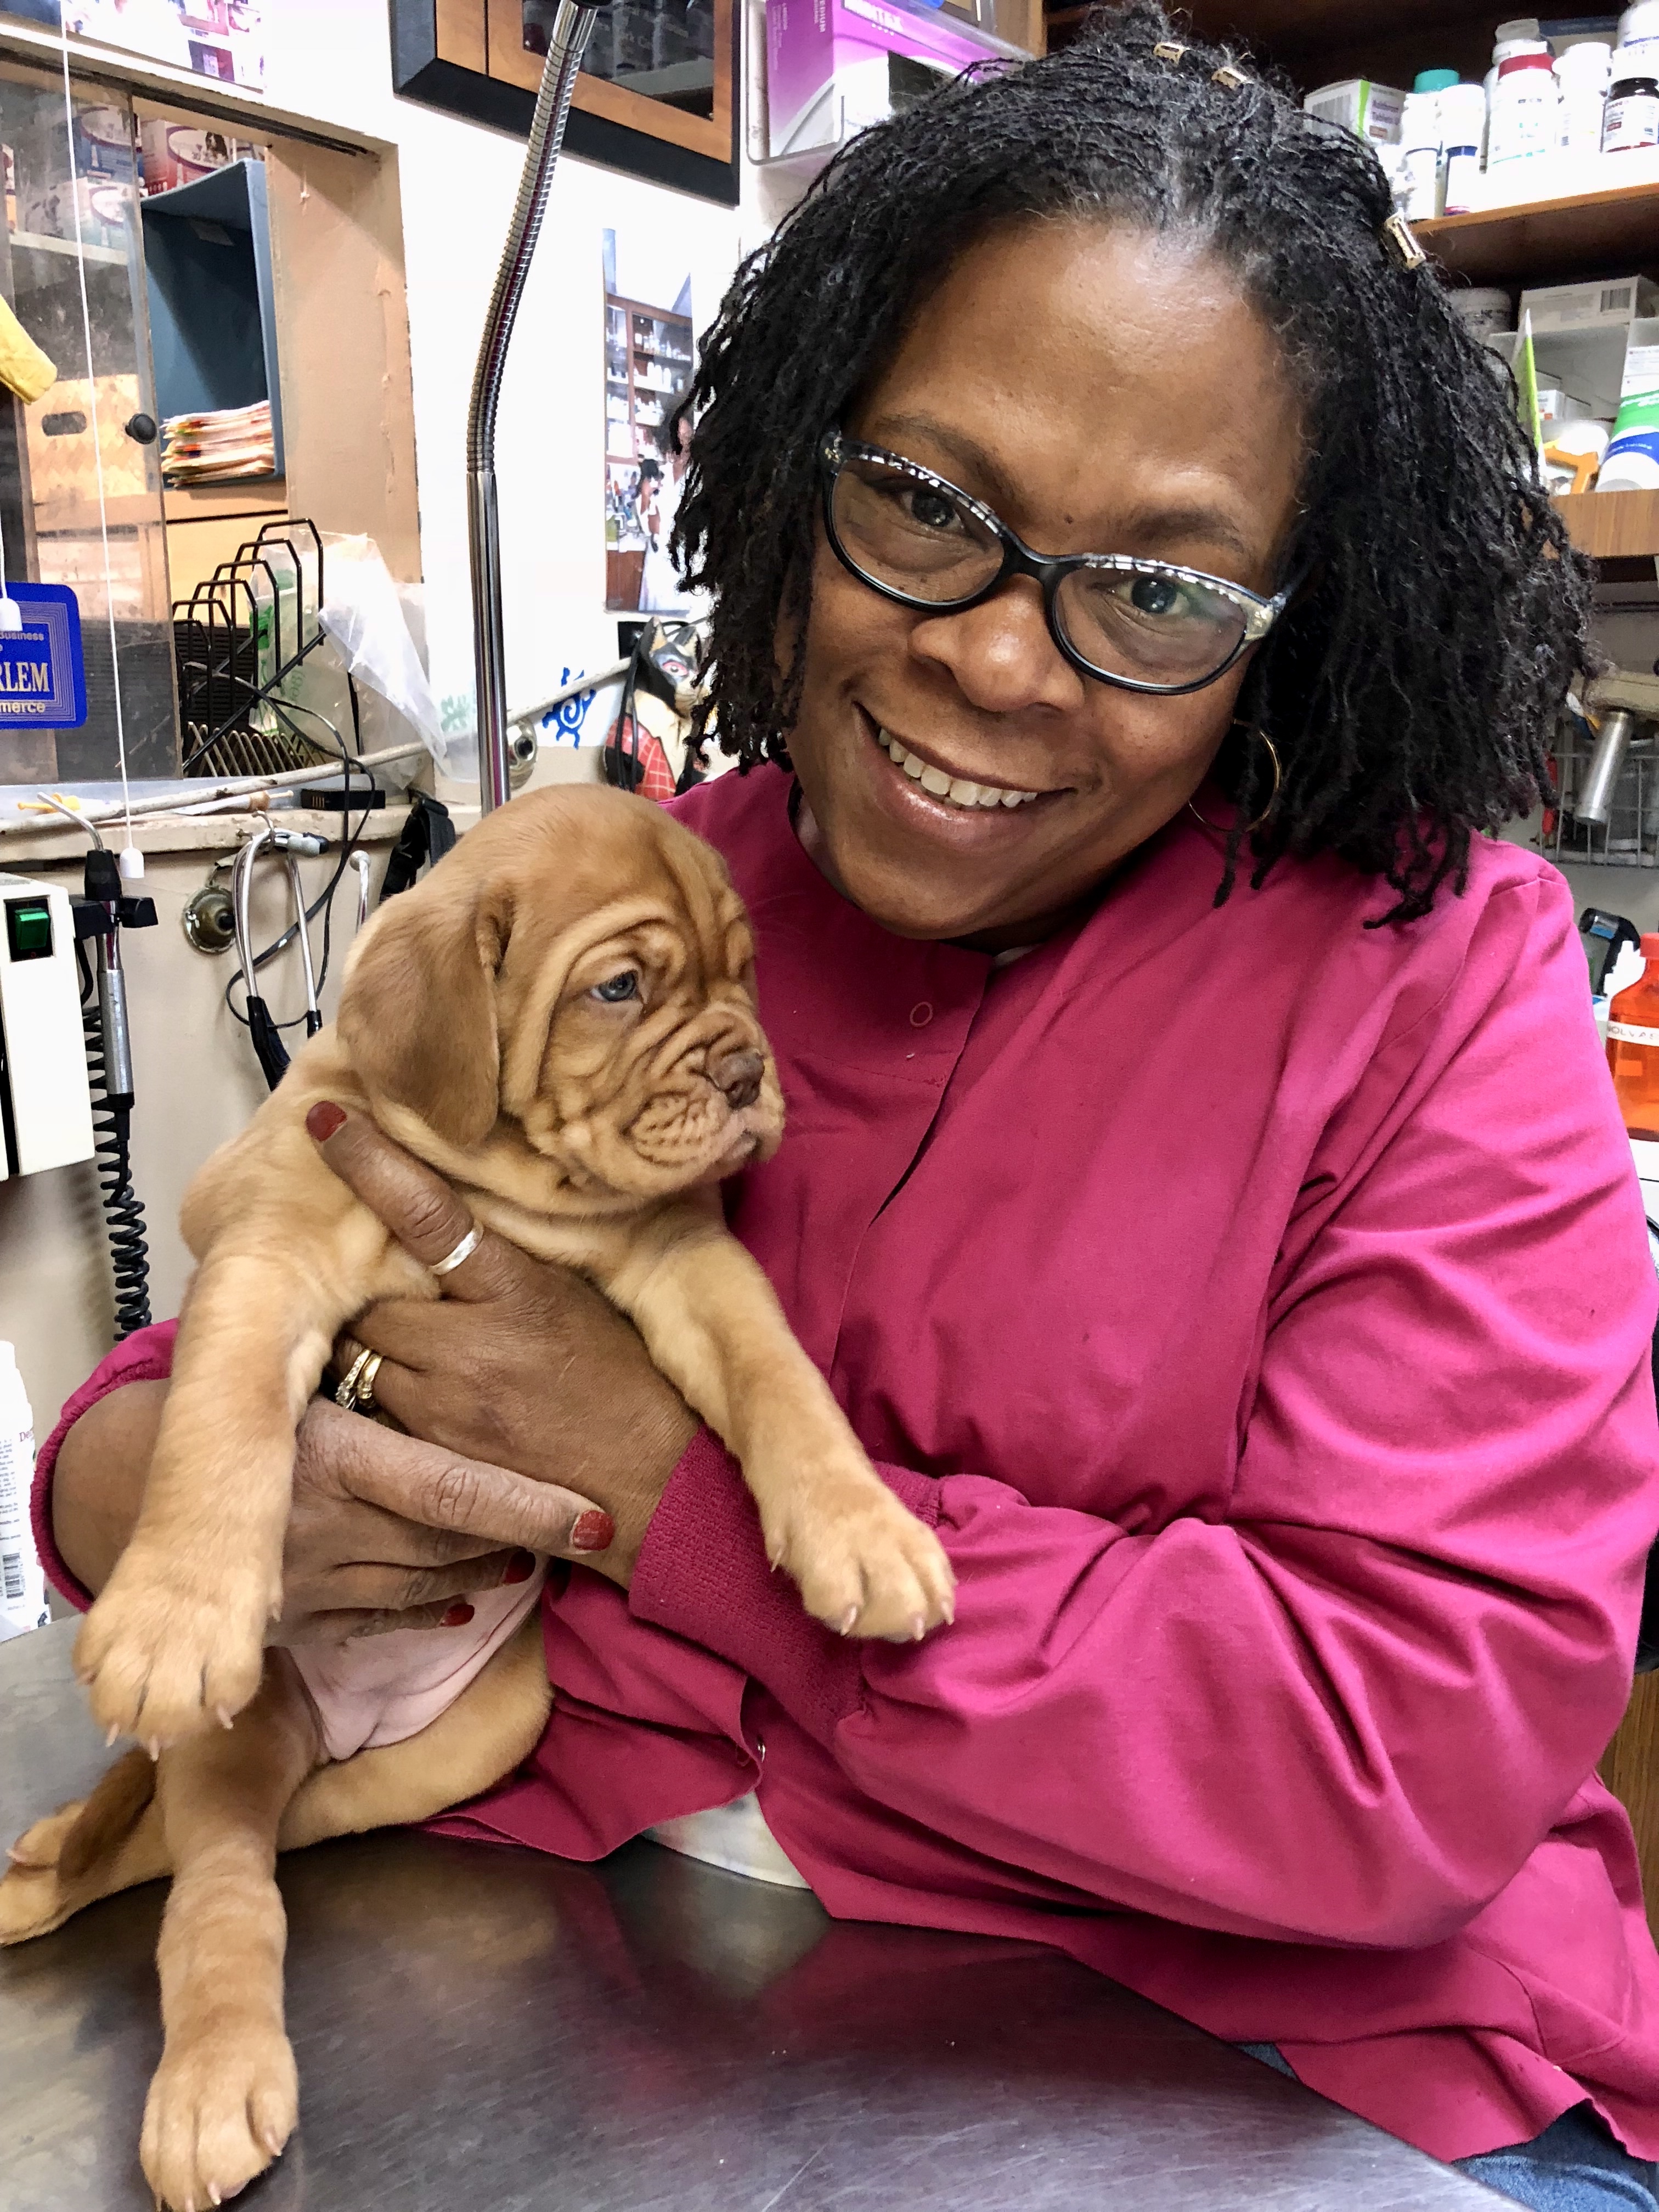 Dr. Butler in a bright pink shirt holding a puppy 